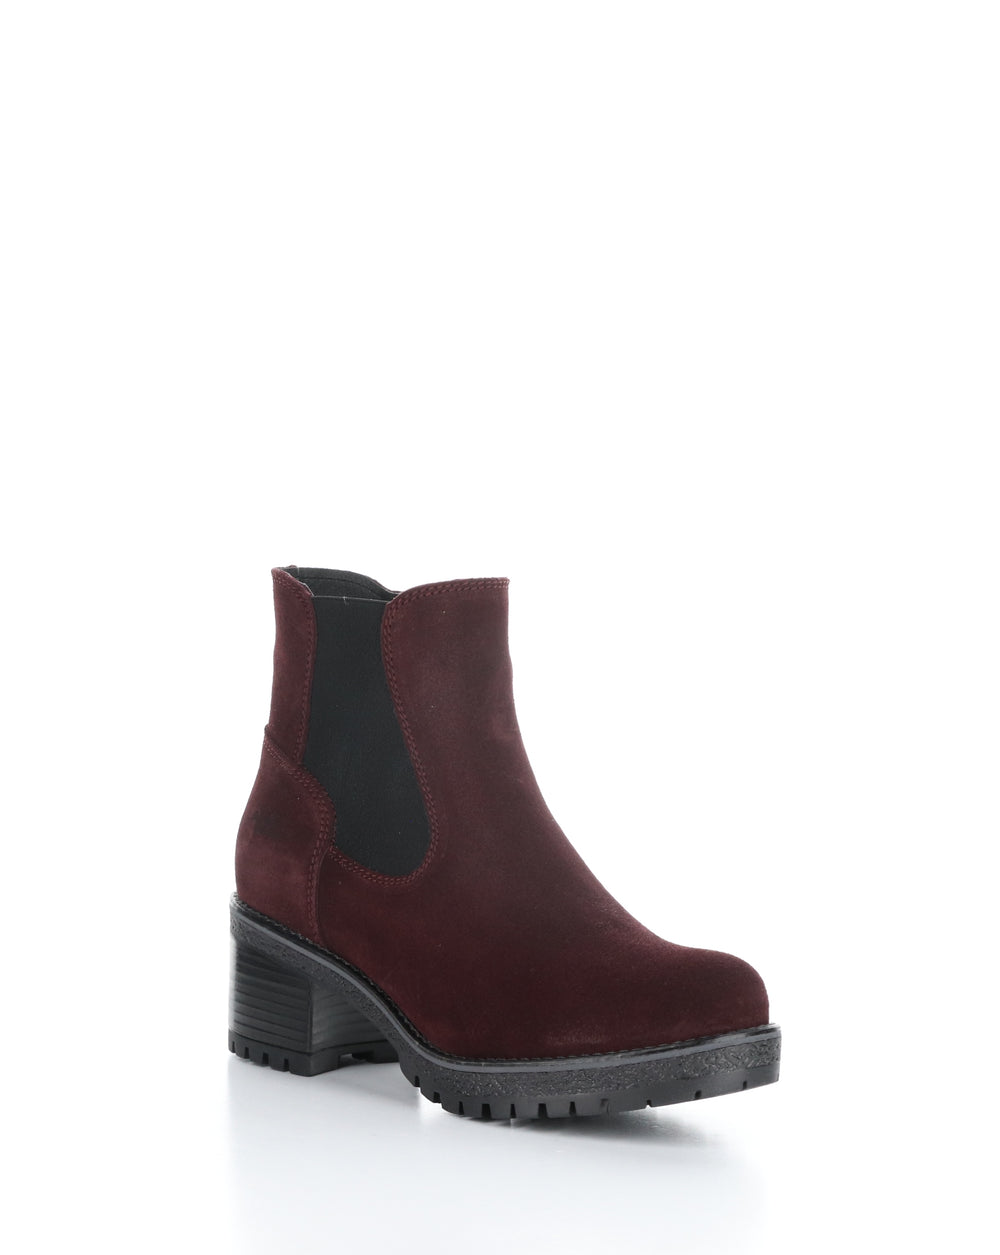 MERCY WOOL MULBERRY Elasticated Boots